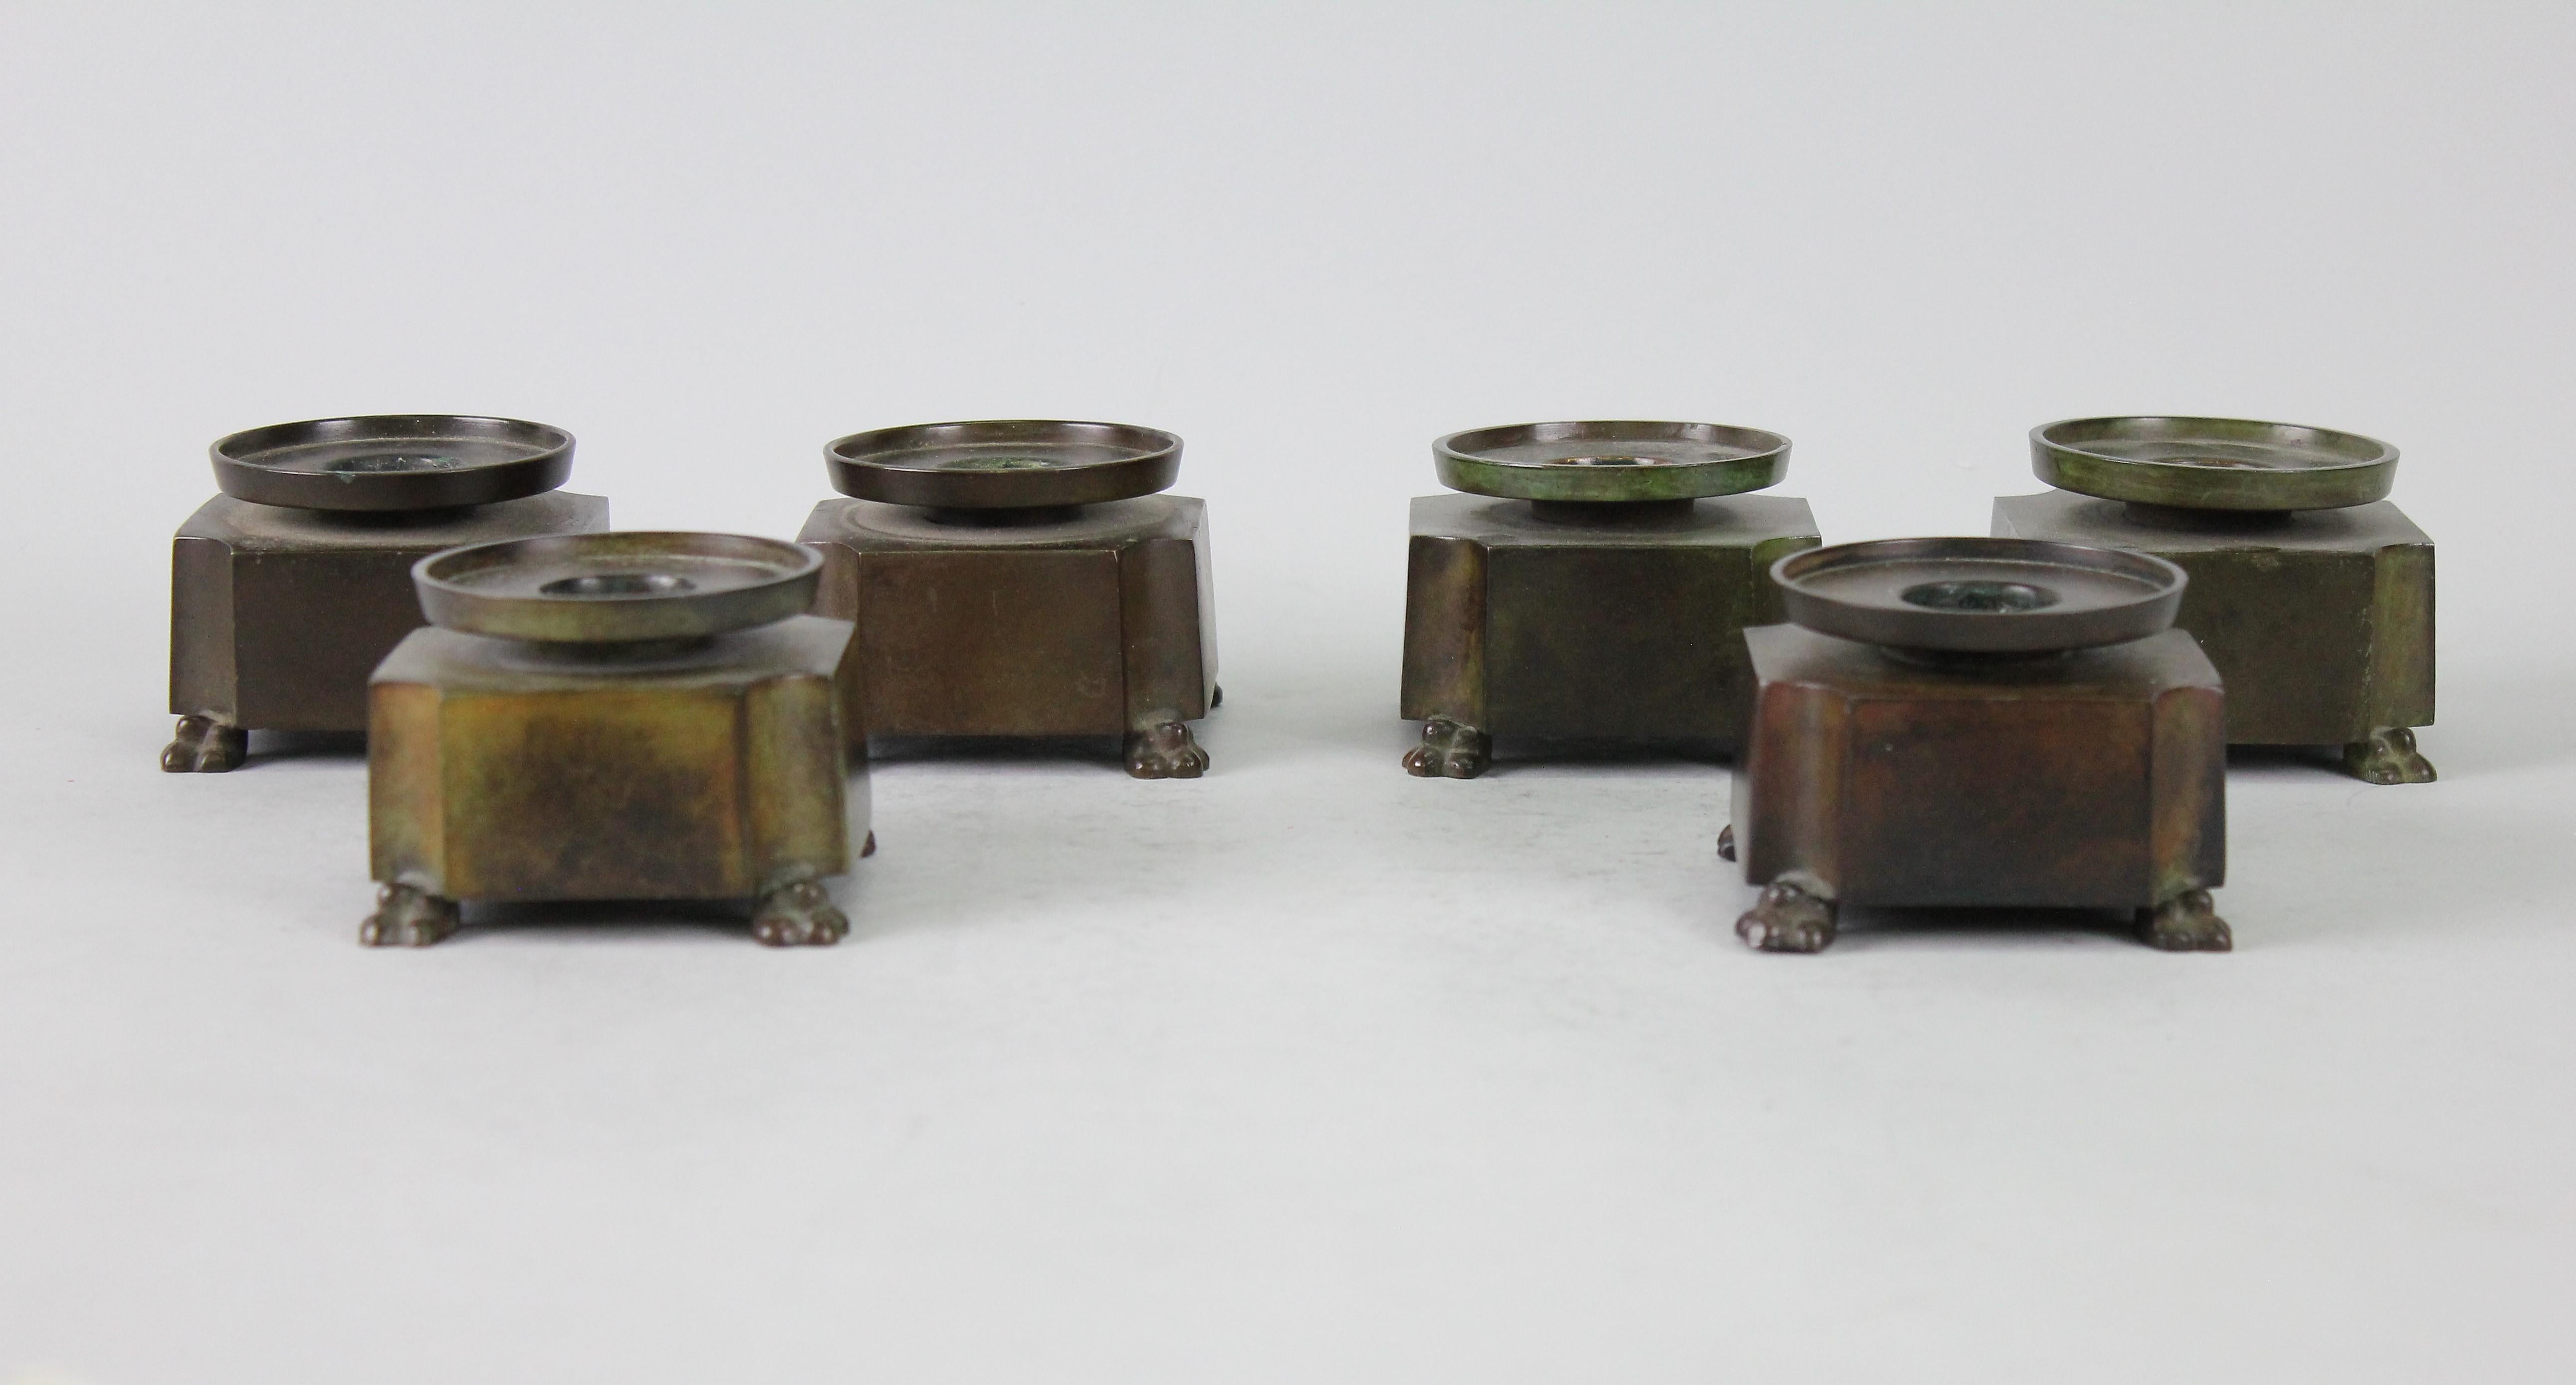 A set of six patinated modernist bronze candlesticks.
Made in Stockholm Sweden by Guldsmedsaktiebolaget (GAB) in the 1930s.
Bronze, patinated in green and brown.

Very nice condition. No issues!
Suitable for normal-sized candles.